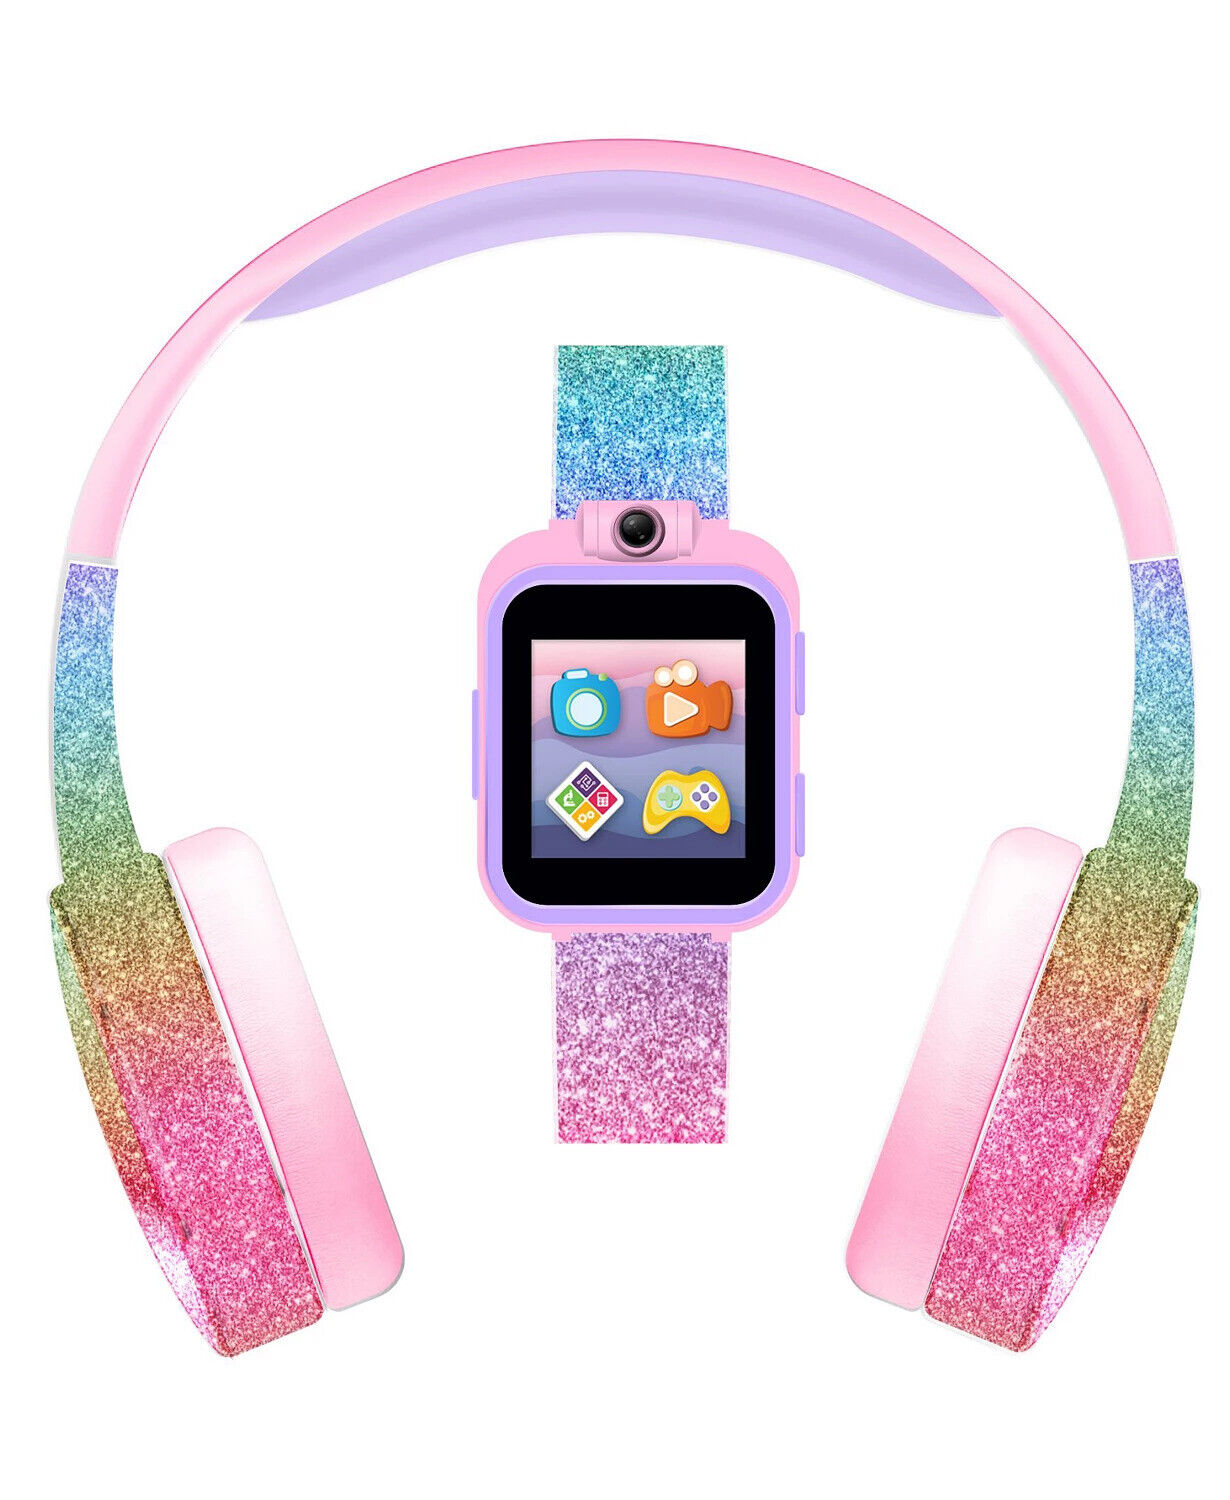 Playzoom Smartwatch With Headphones For Kids: Pink Rainbow Glitter